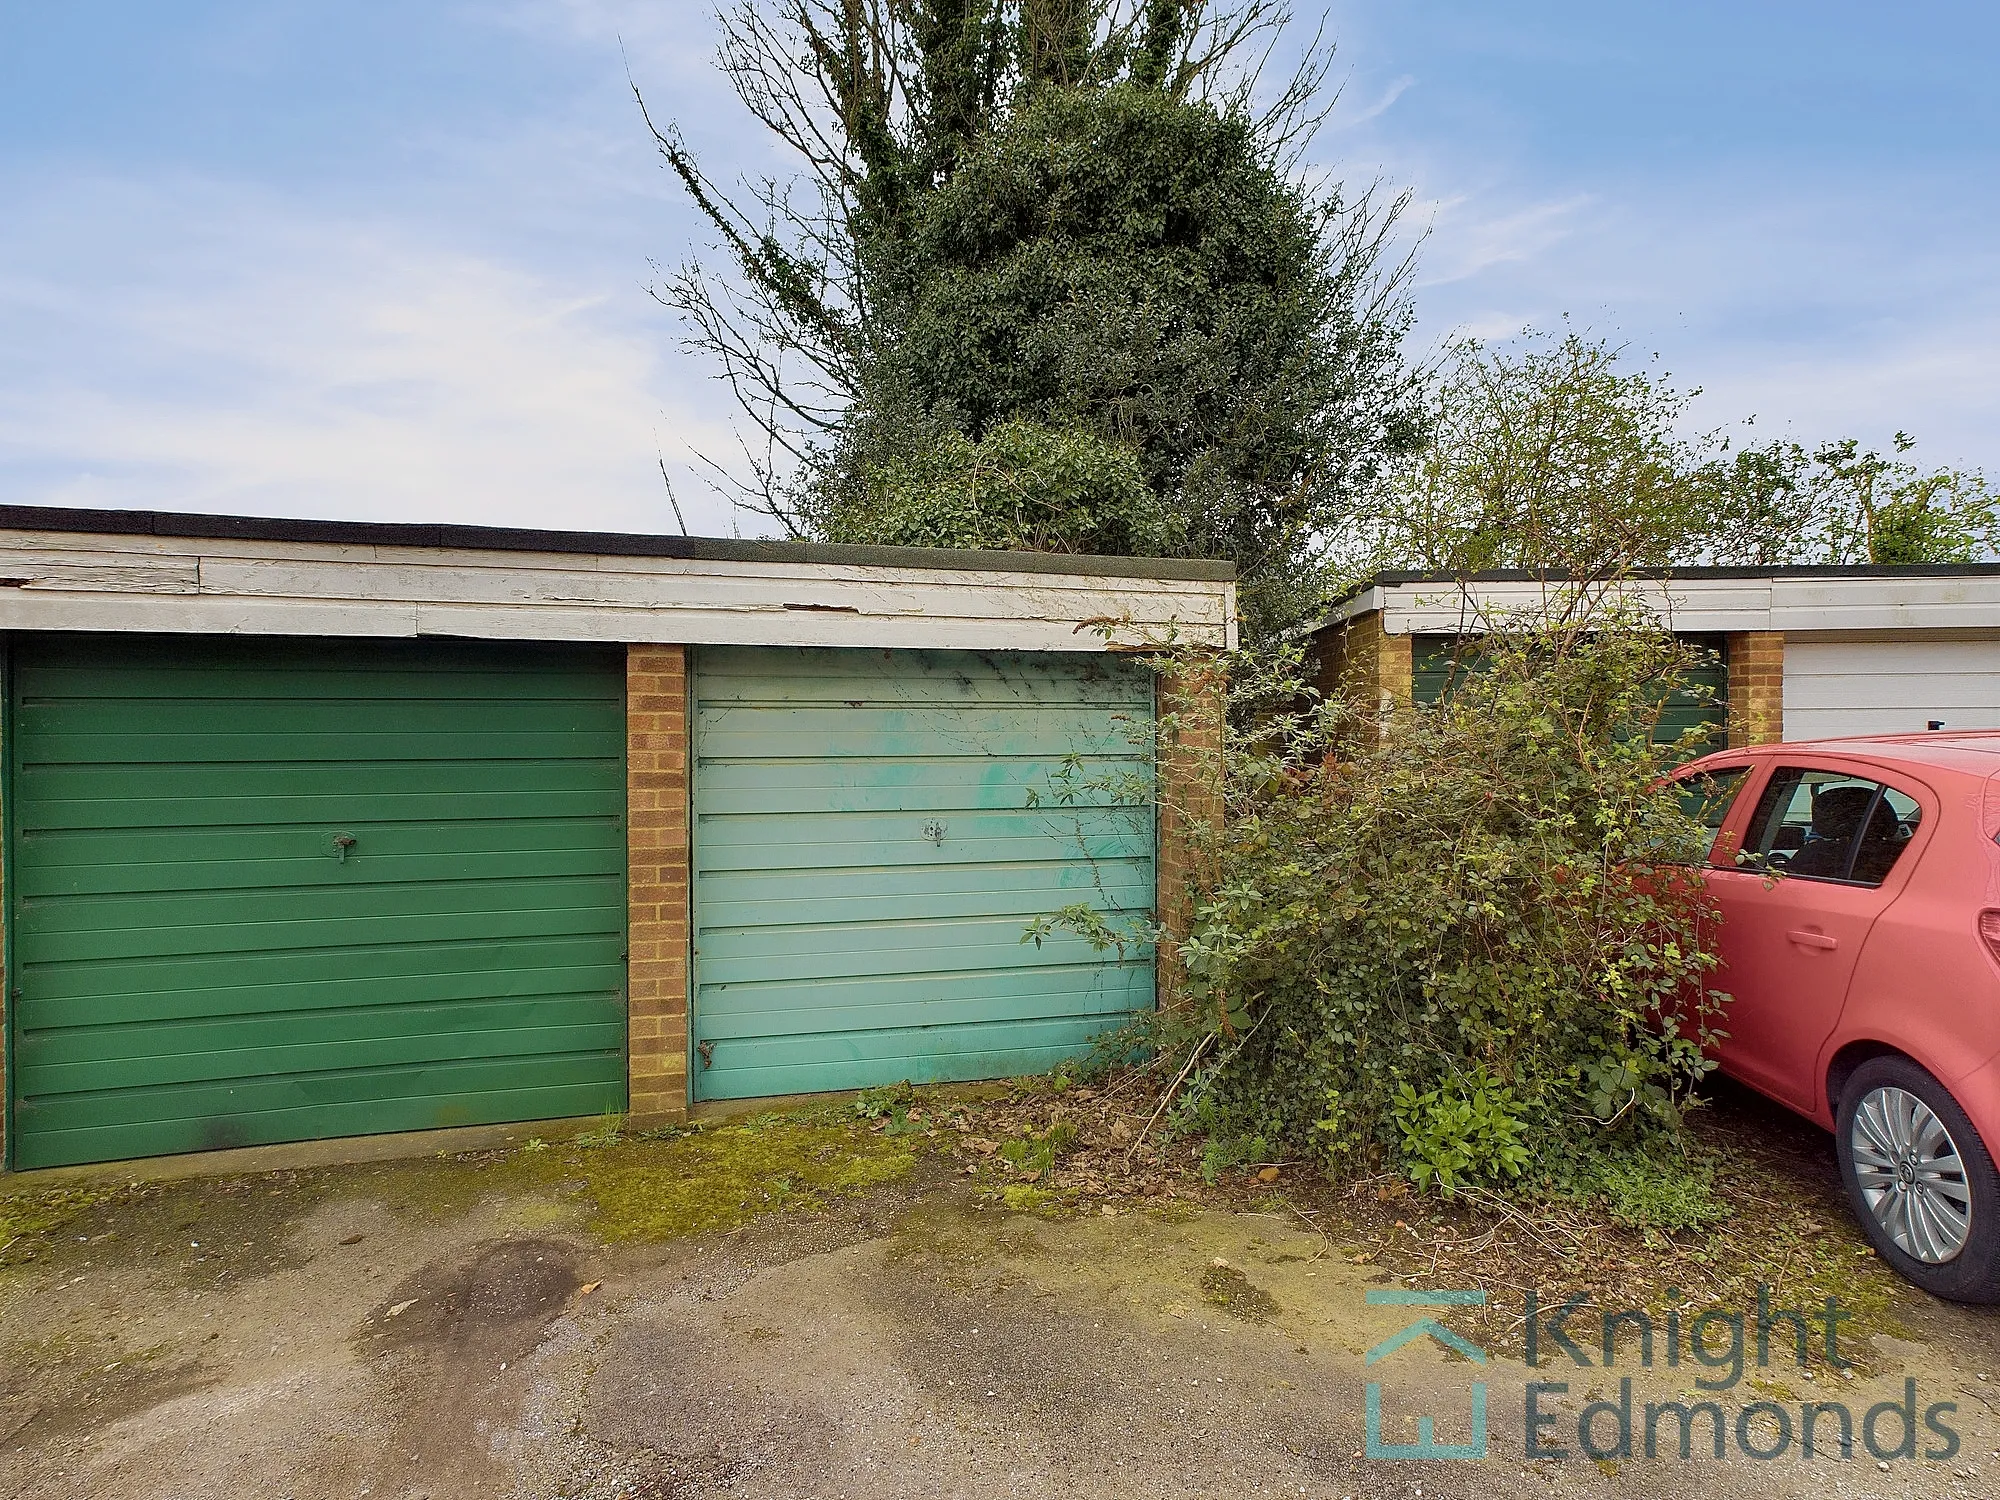 3 bed mid-terraced house for sale in Elmstone Close, Maidstone  - Property Image 11